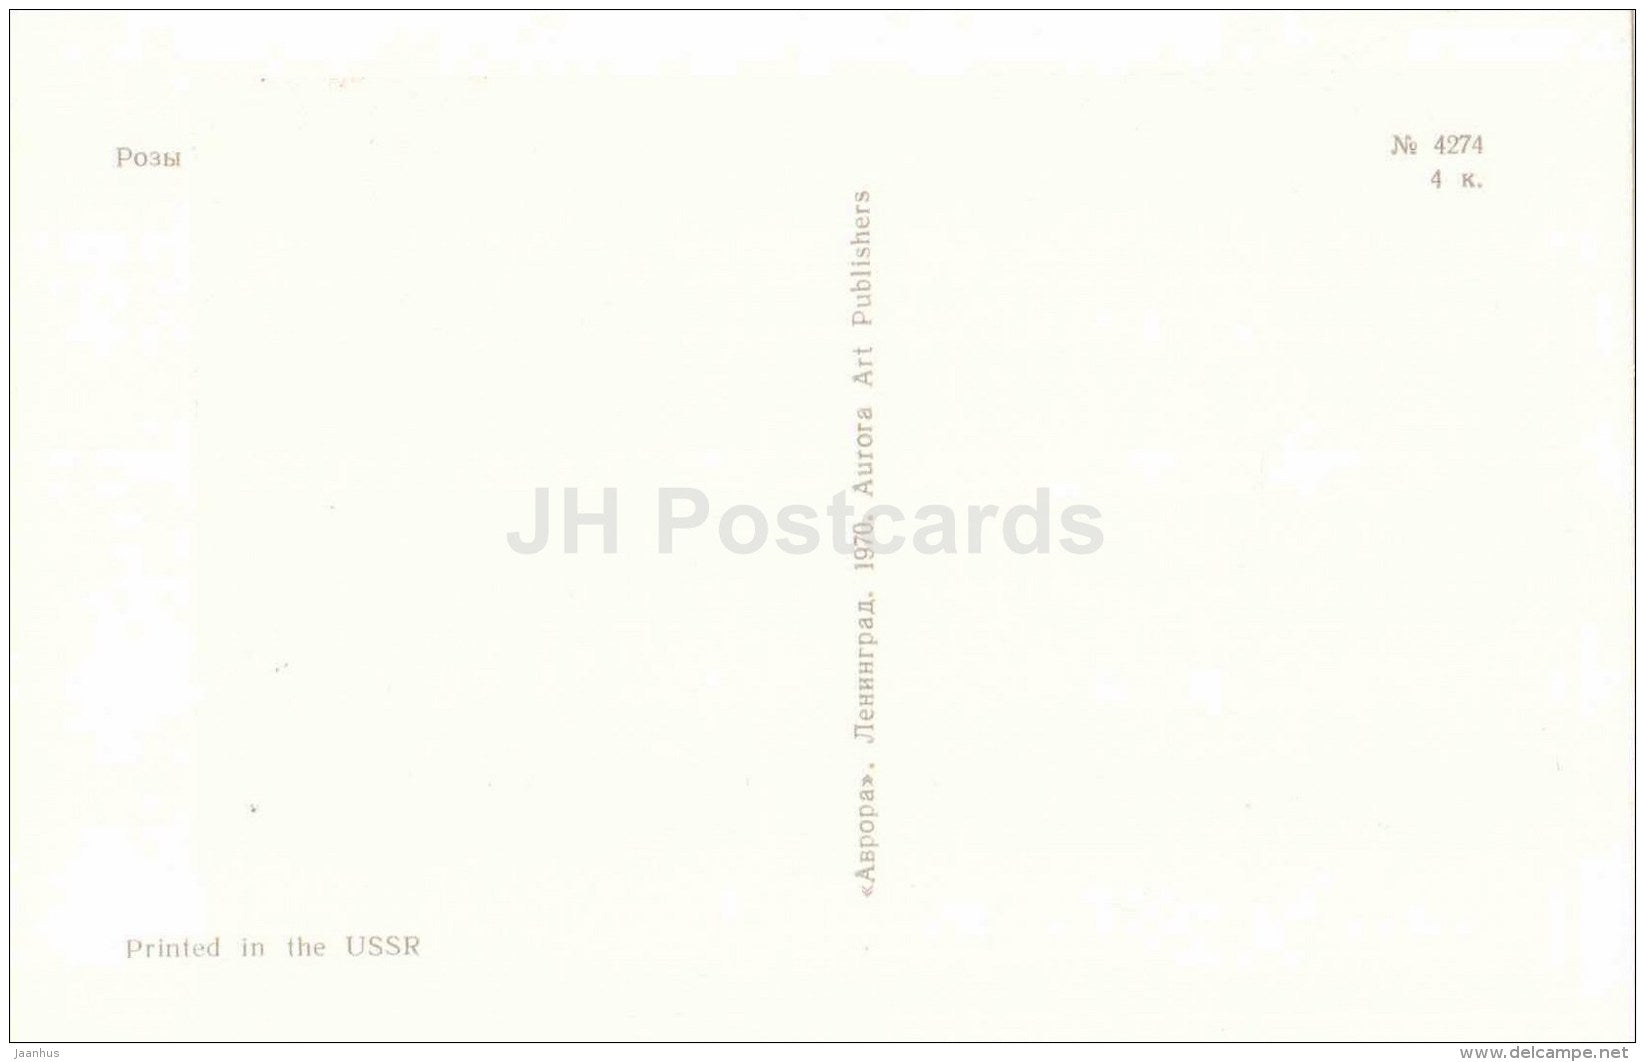 yellow rose - flowers - Russia USSR - unused - JH Postcards